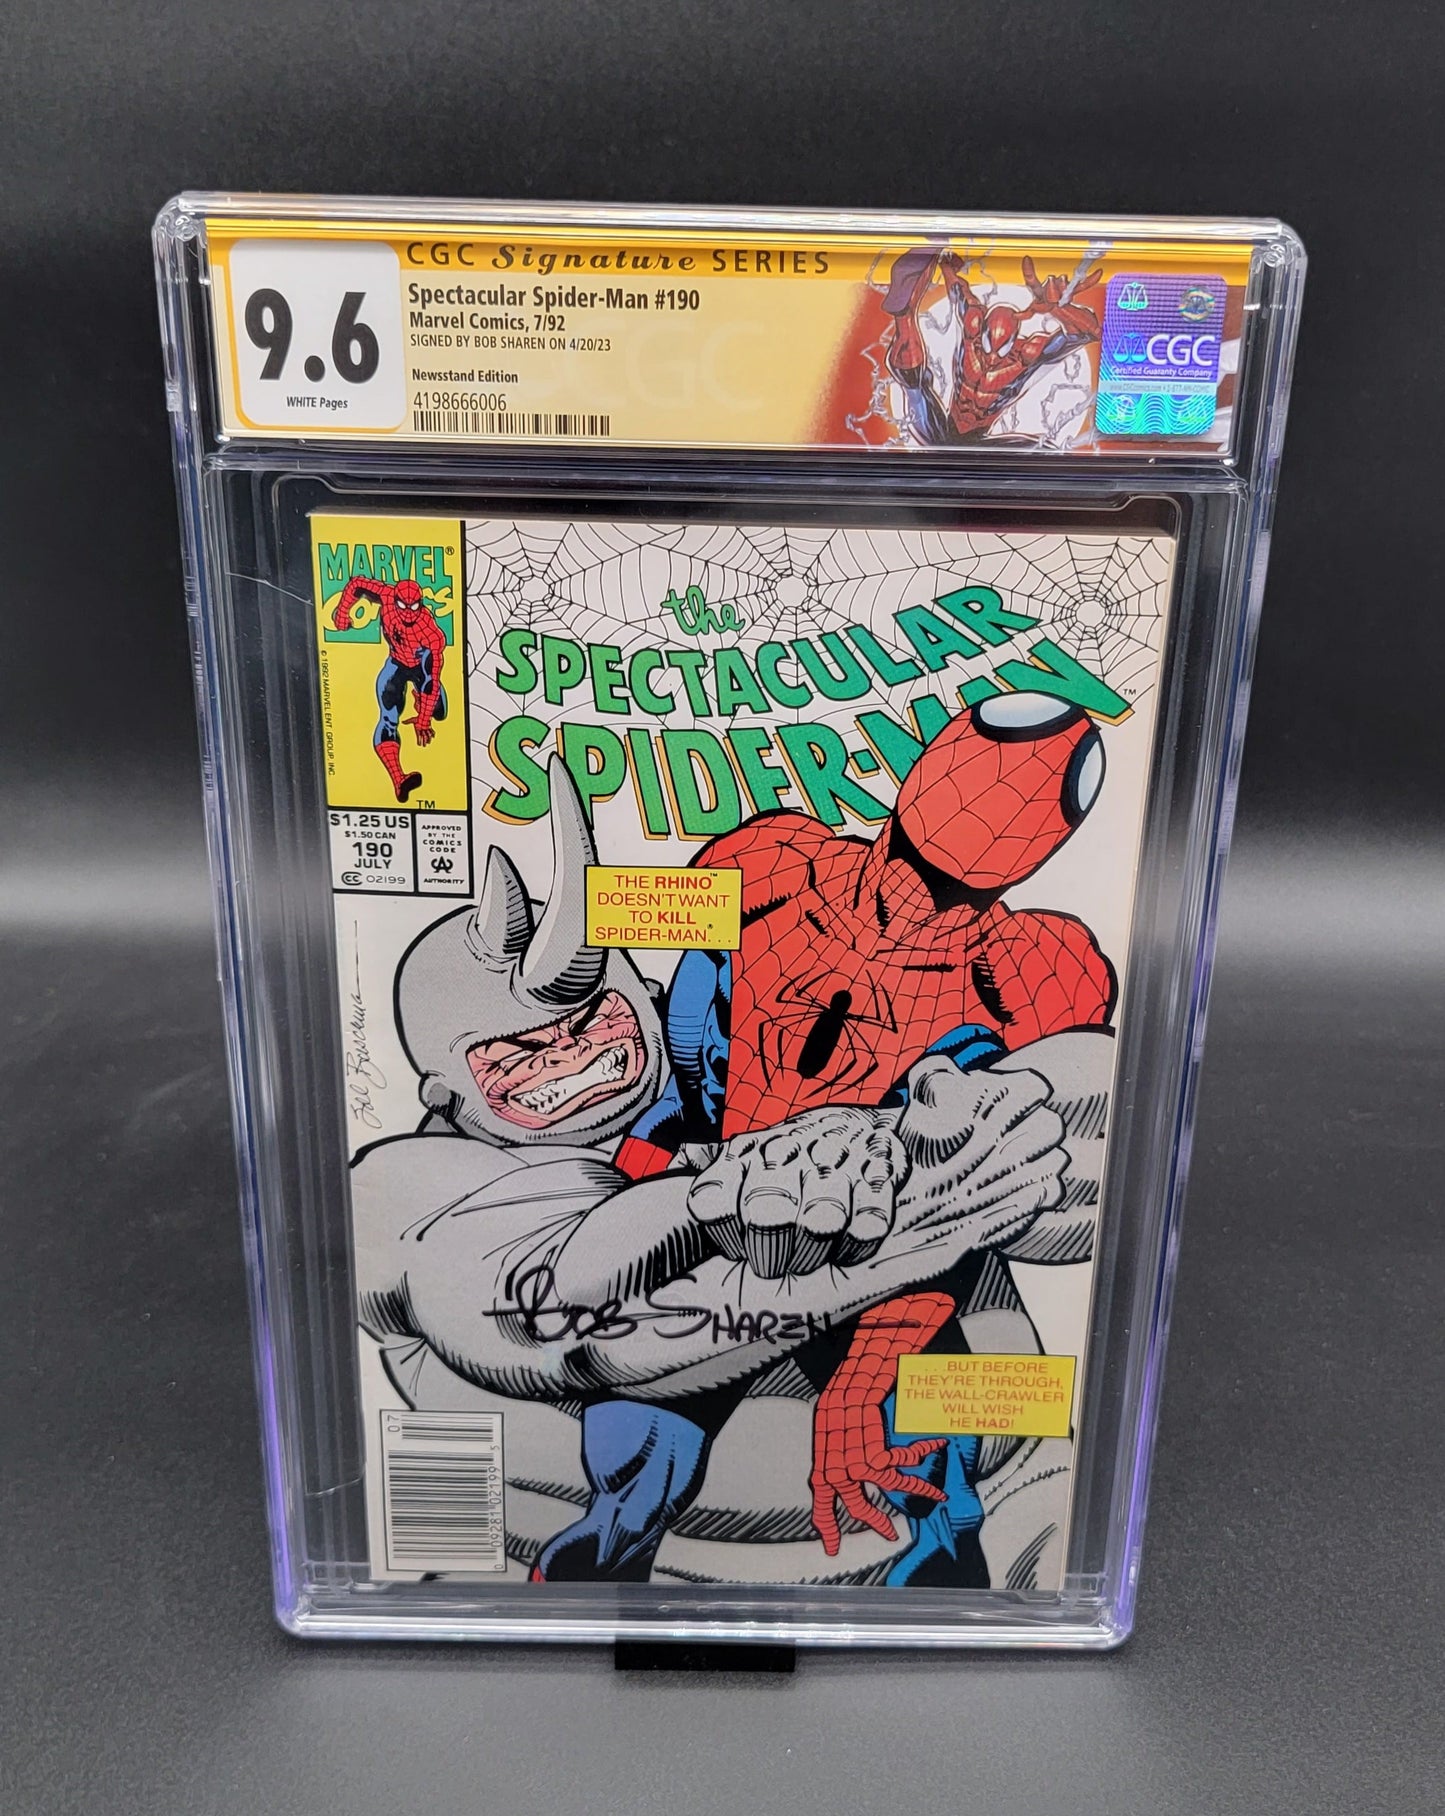 The Spectacular Spider-Man #190 1992 CGC SS 9.6 signed by Bob Sharen